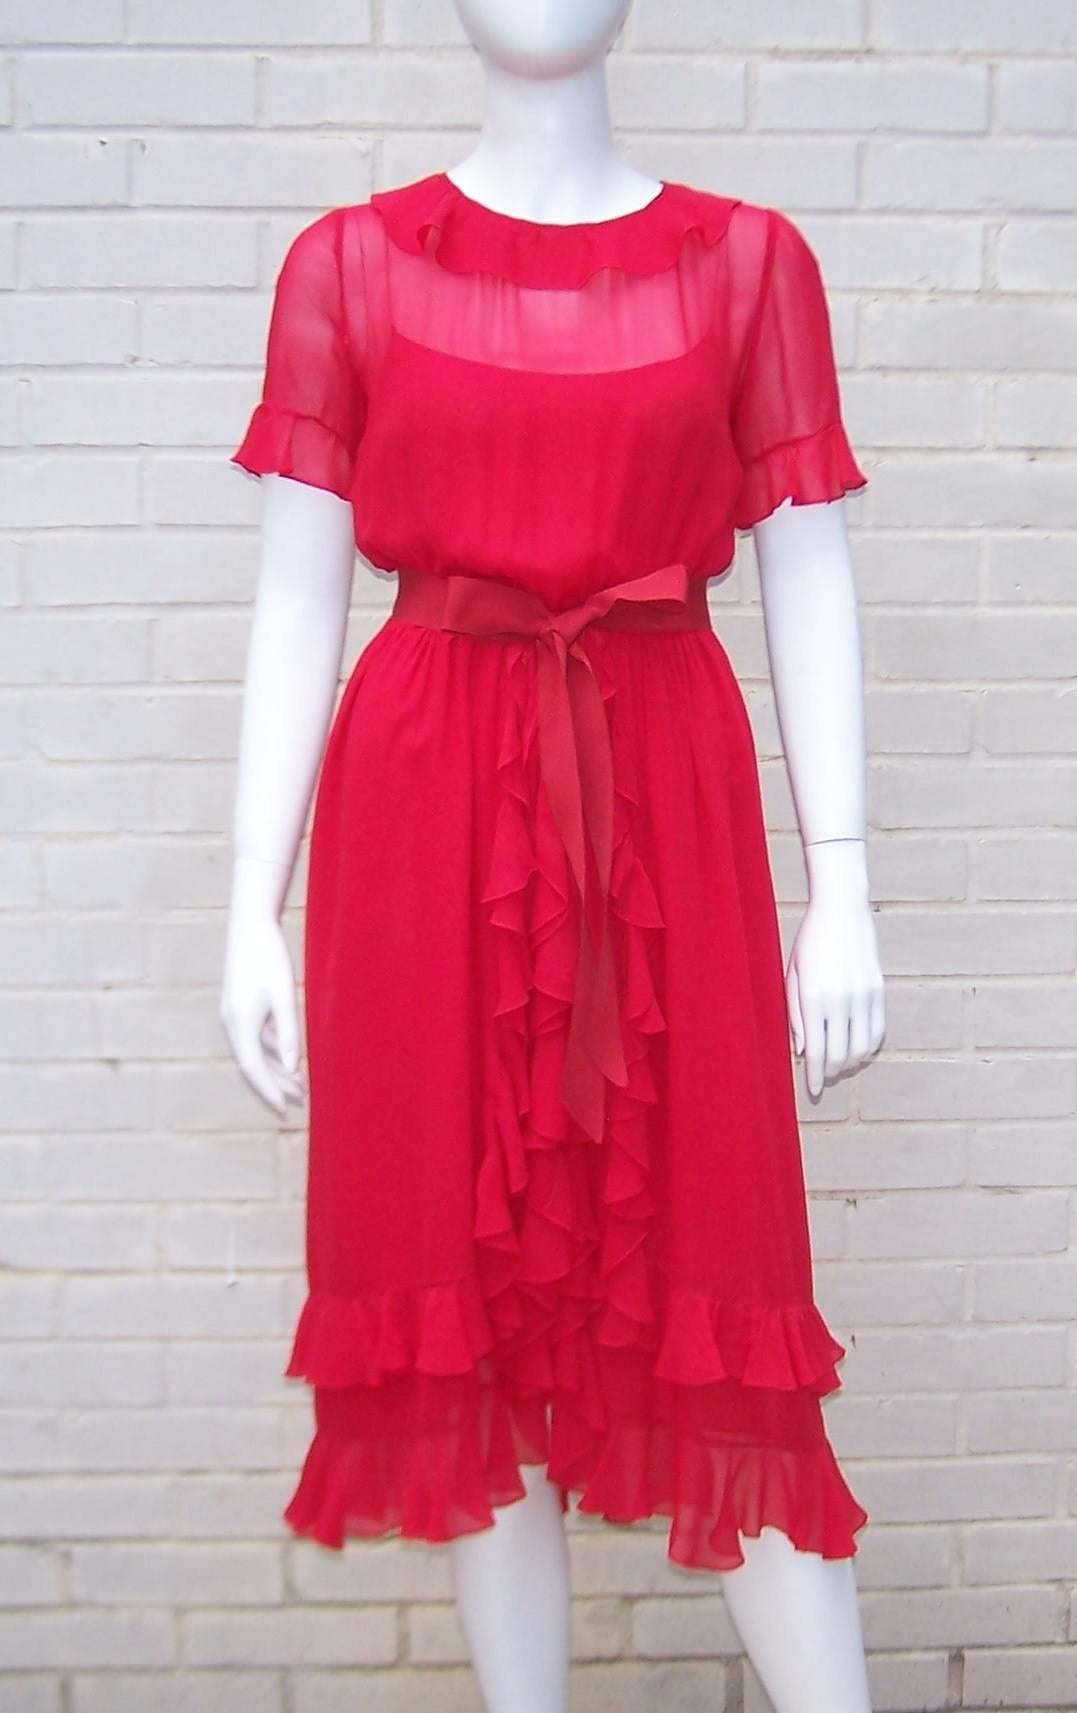 The style says 'coquette' but the color says 'femme fatale' ... put yourself into this 1970's Bill Blass silk chiffon dress and decide which one you will be for the evening.  The gorgeous color of the dress is paired with ruffles at the neck, sleeve